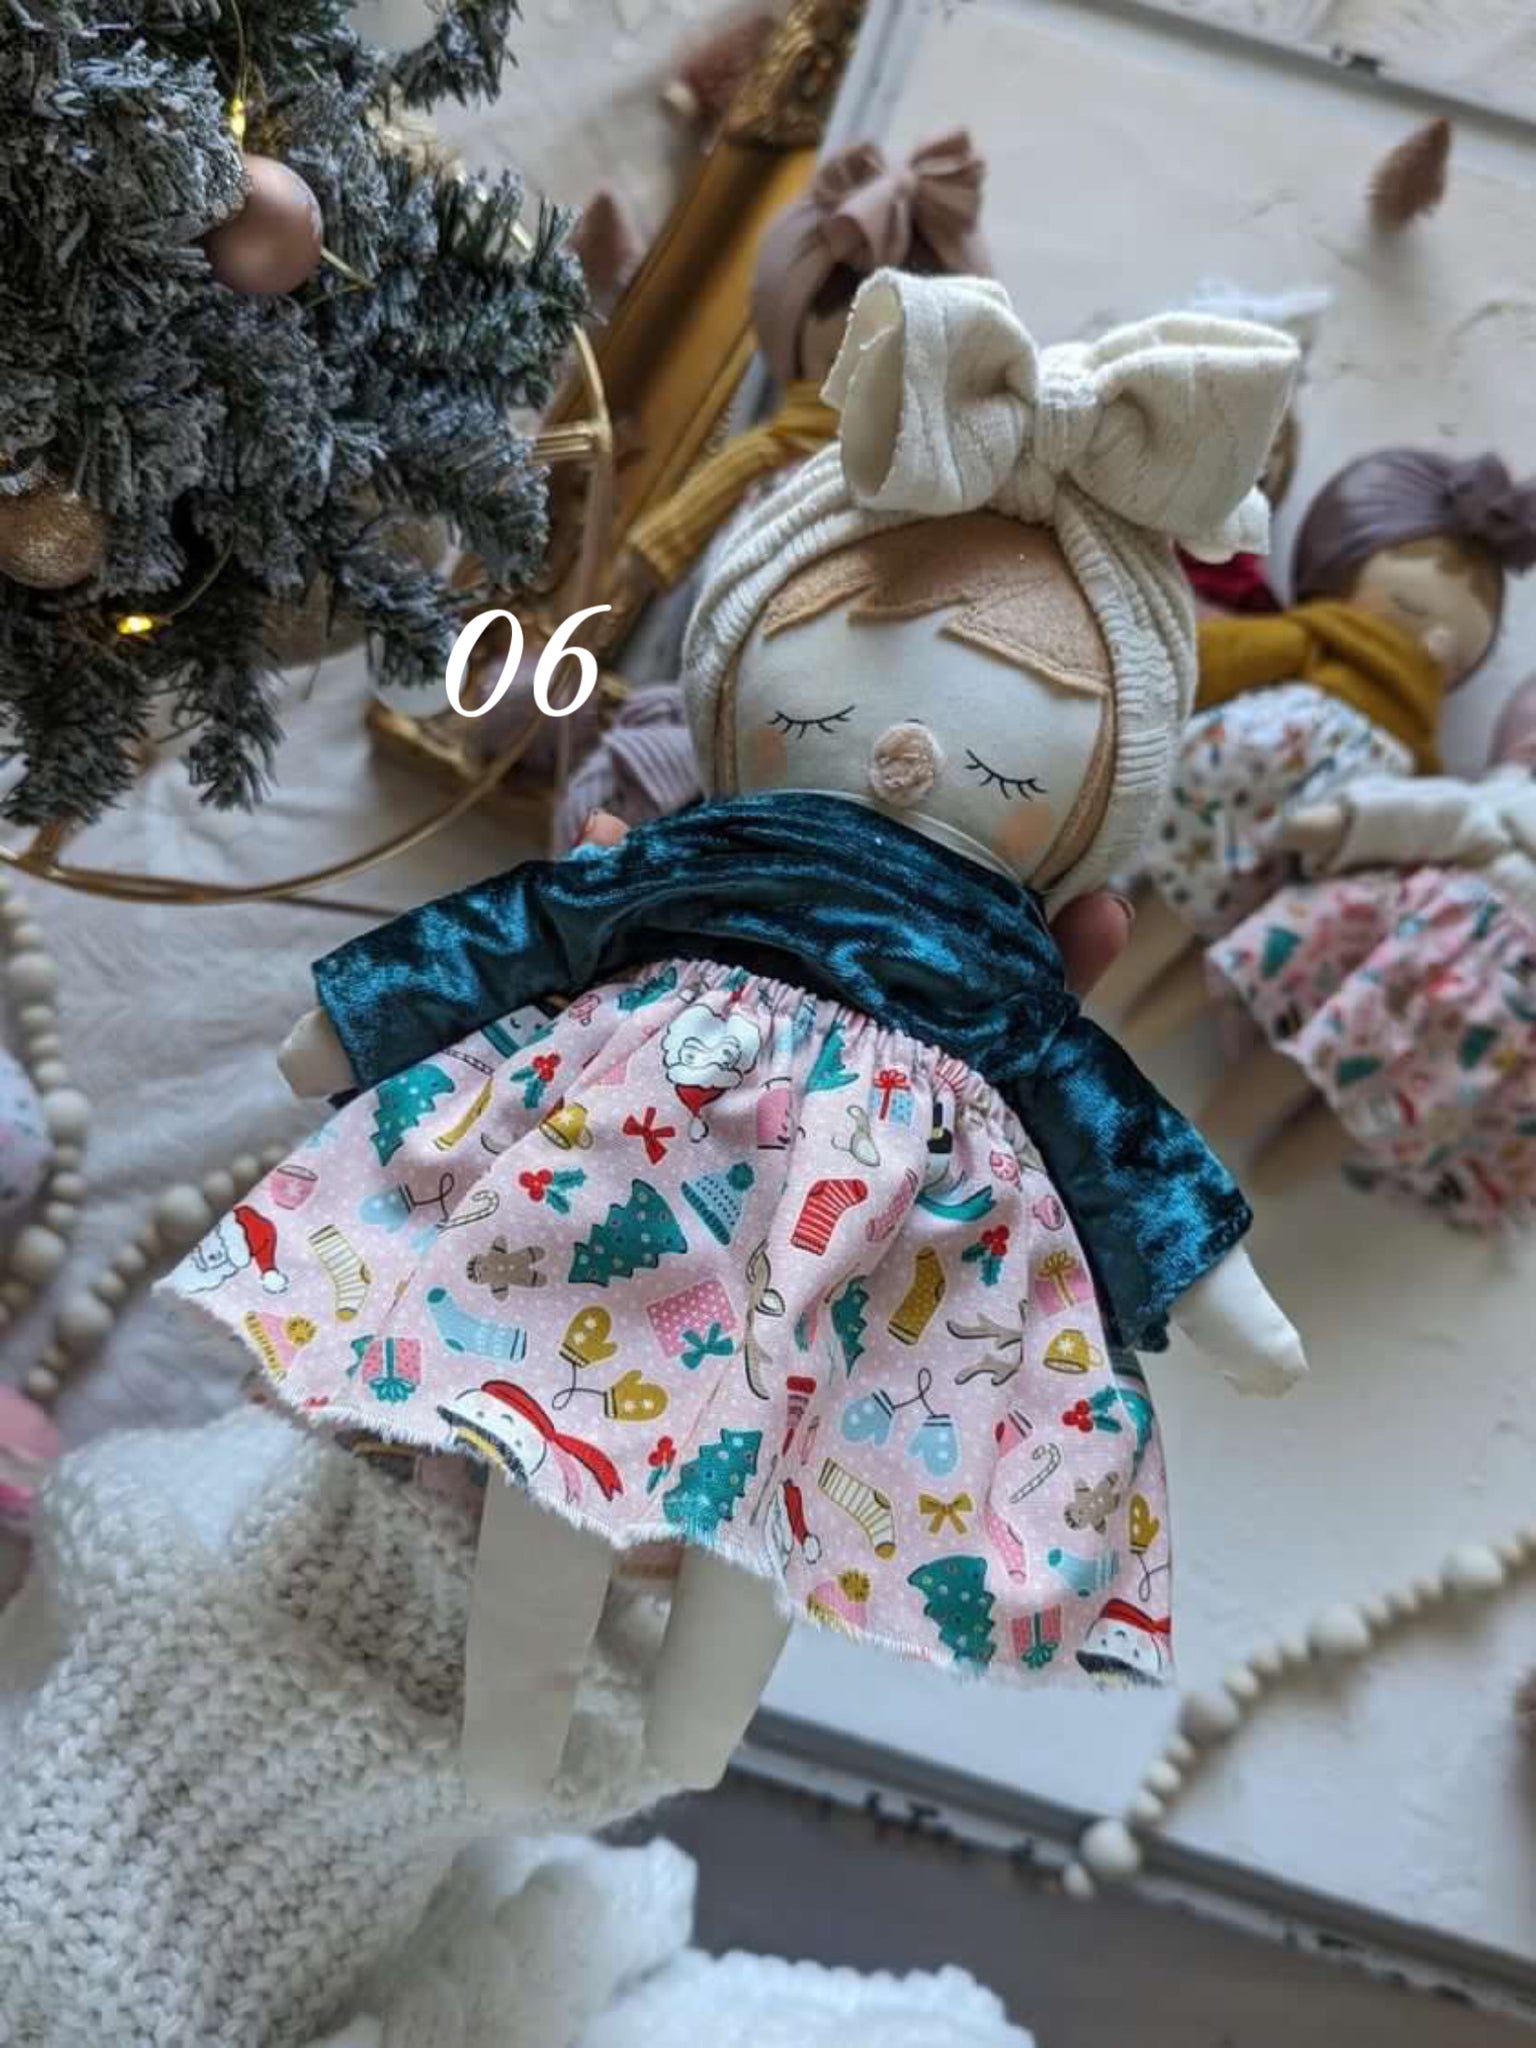 06 Small baby doll, soft children toys, Holiday collection